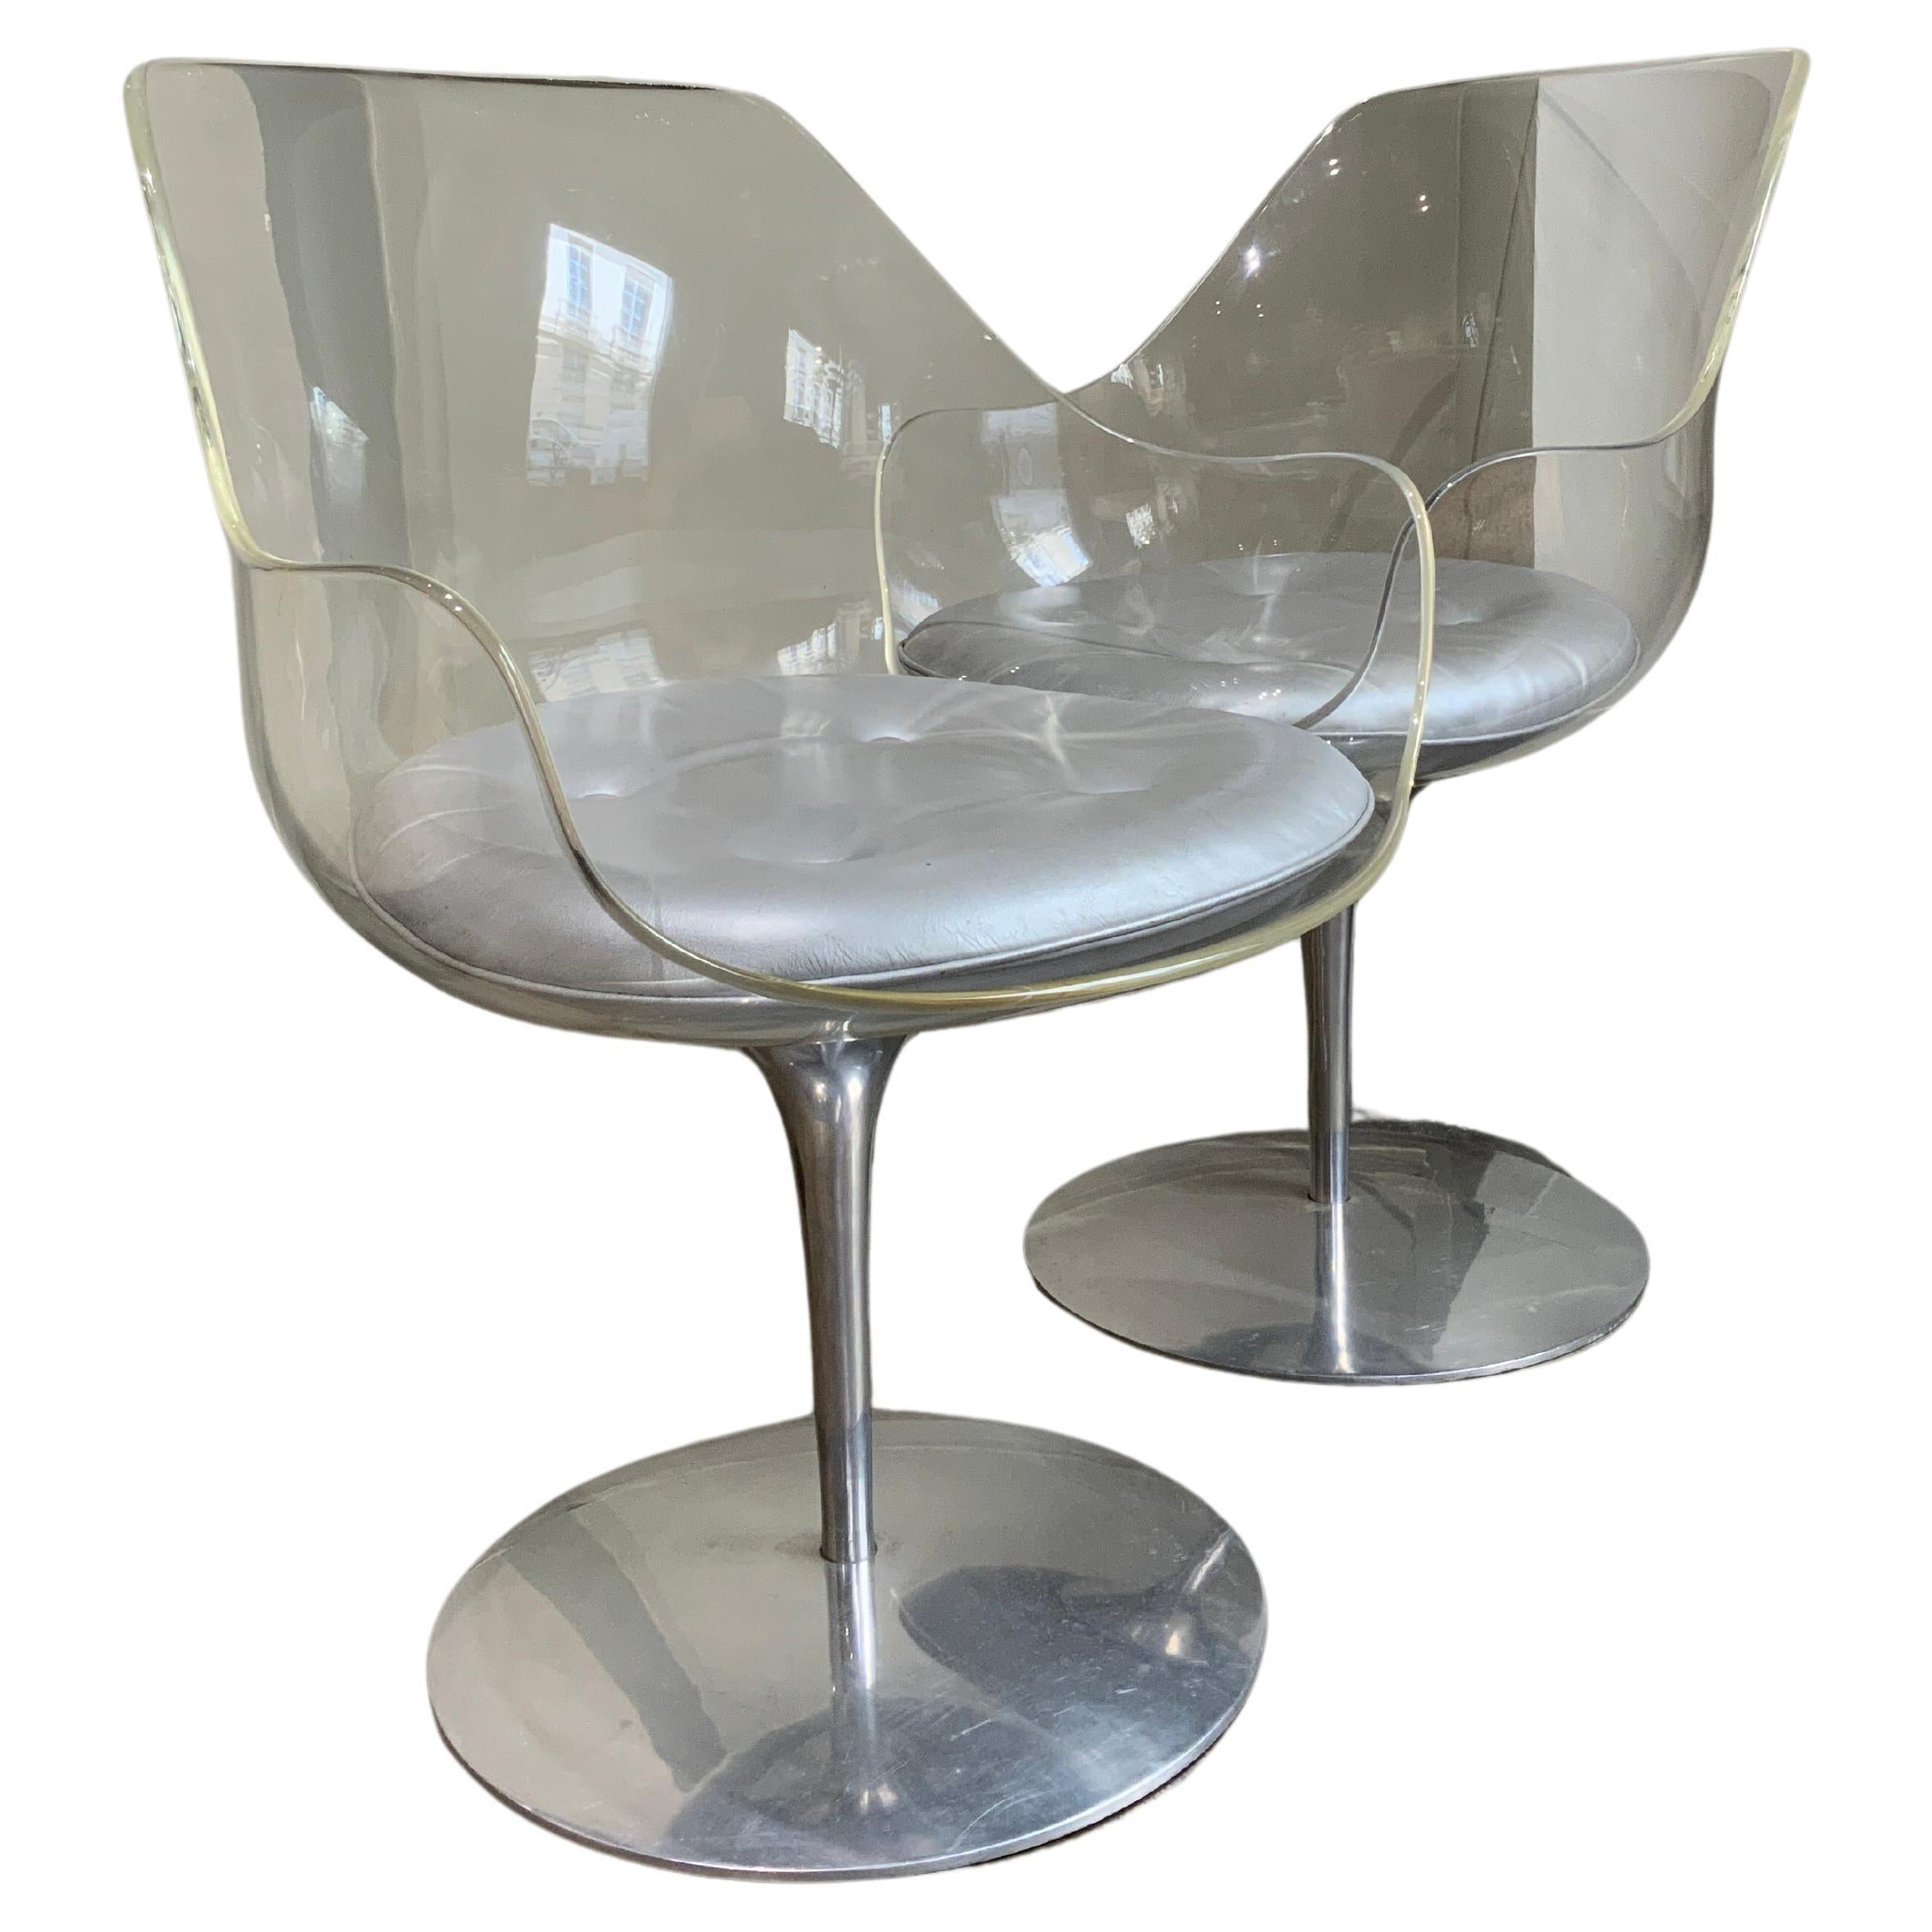 Pair of Champagne chairs Erwin Estelle Laverne France 1960